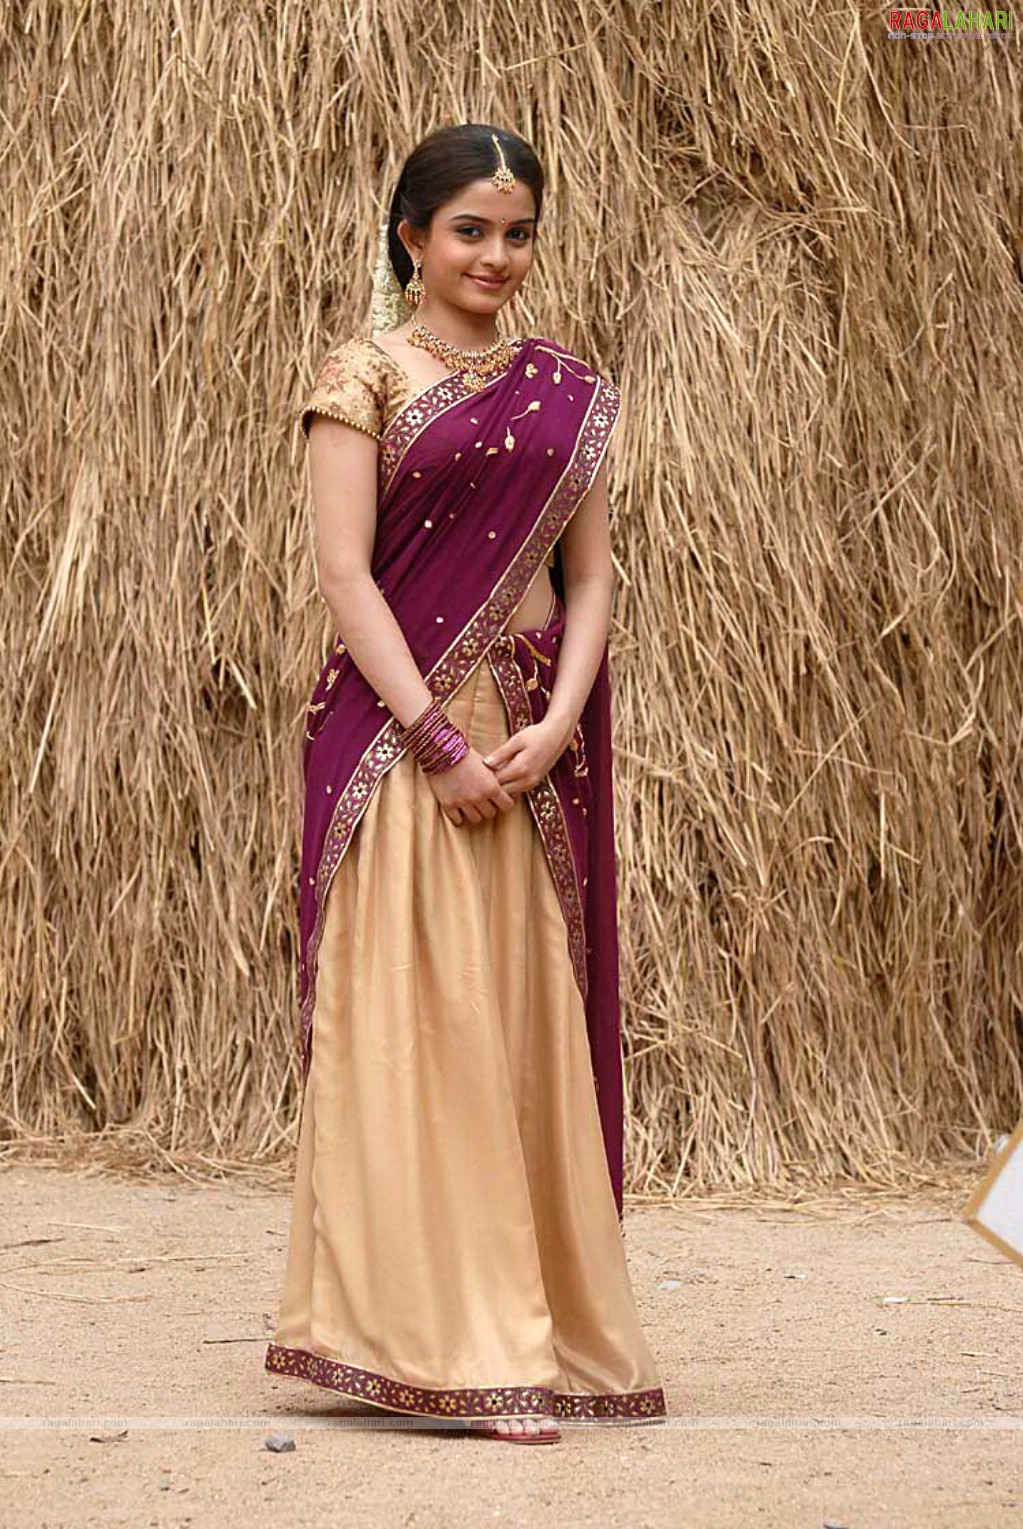 South Indian Half Saree Girls My Collection 2838 The Best Porn Website 